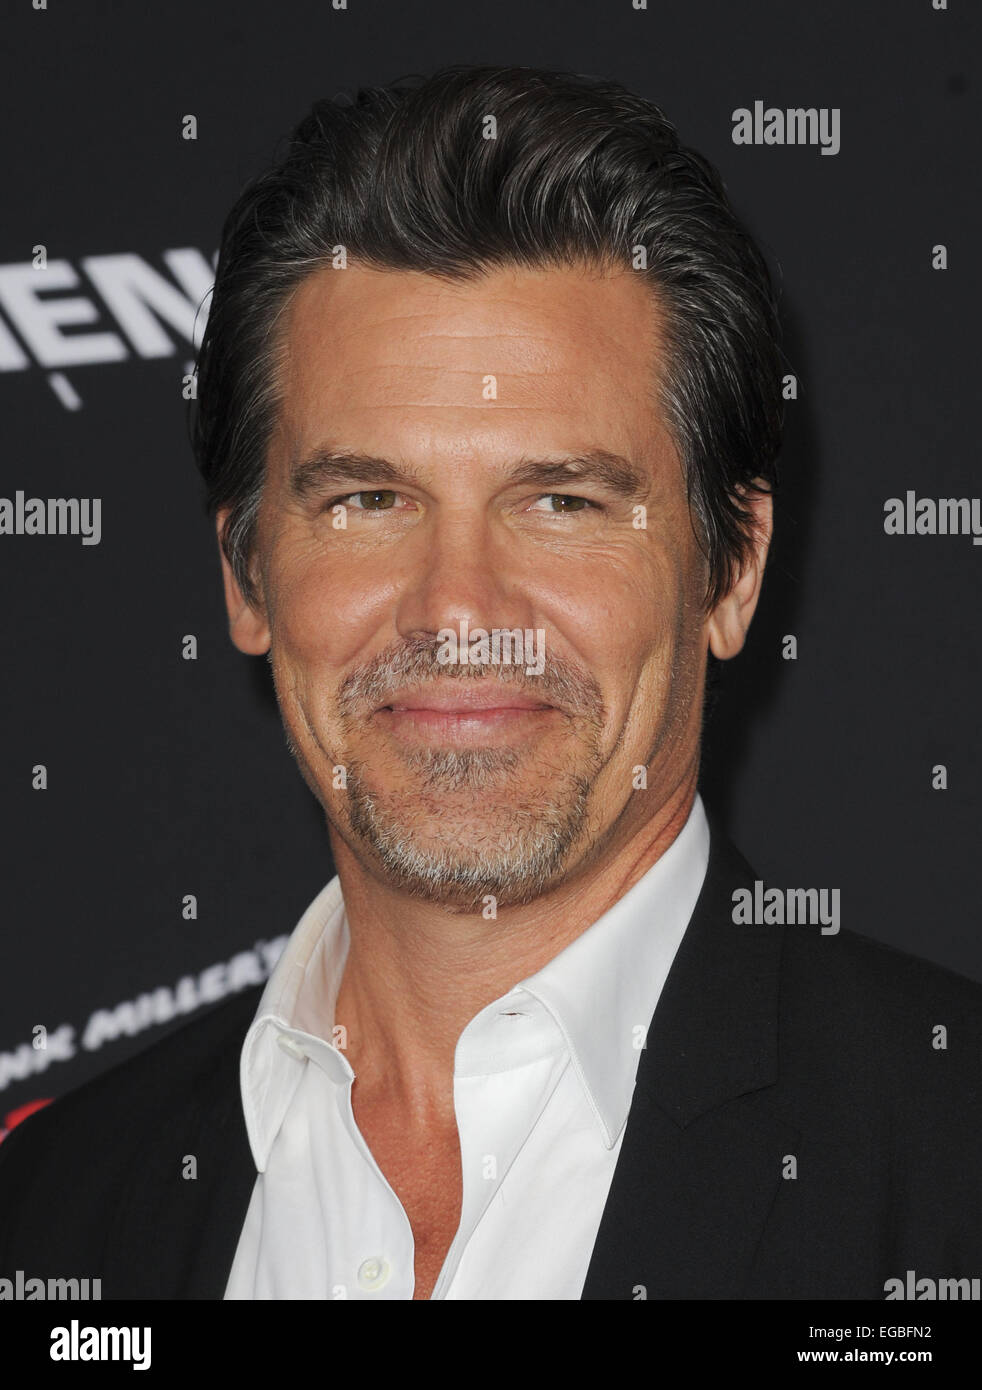 Premiere of 'Sin City: A Dame To Kill For' - Arrivals Featuring: Josh Brolin Where: Los Angeles, California, United States When: 20 Aug 2014 Stock Photo